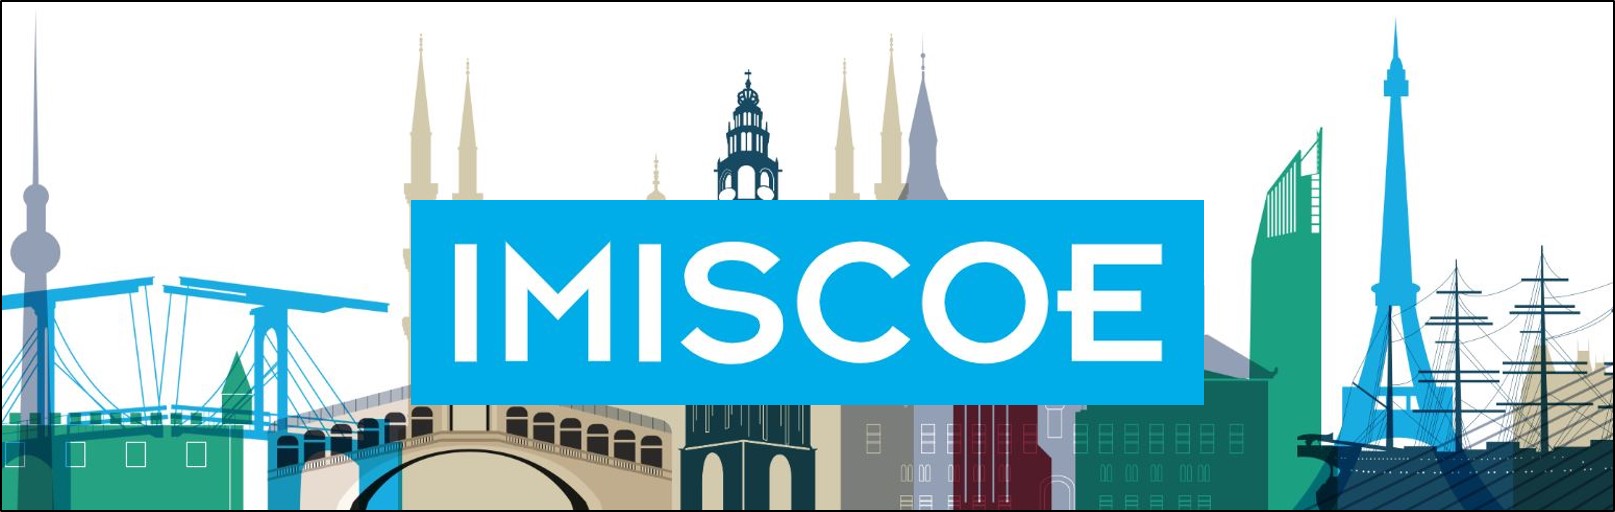 IMISCOE logo in blue and white with city illustration backdrop